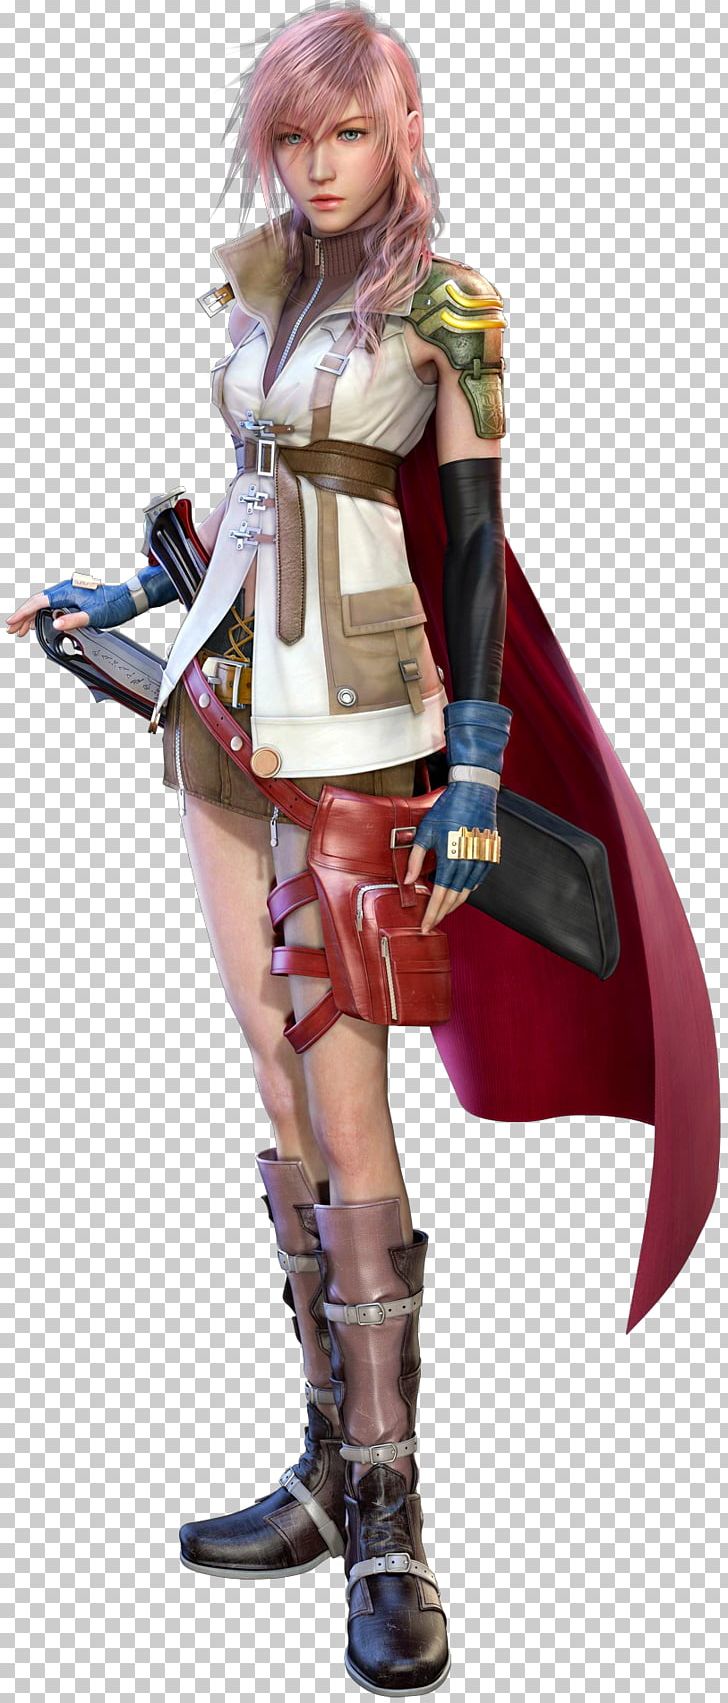 Lightning Returns: Final Fantasy XIII Final Fantasy XV Final Fantasy XIII-2 Street Fighter III PNG, Clipart, Action Figure, Character, Chunli, Cosplay, Costume Free PNG Download